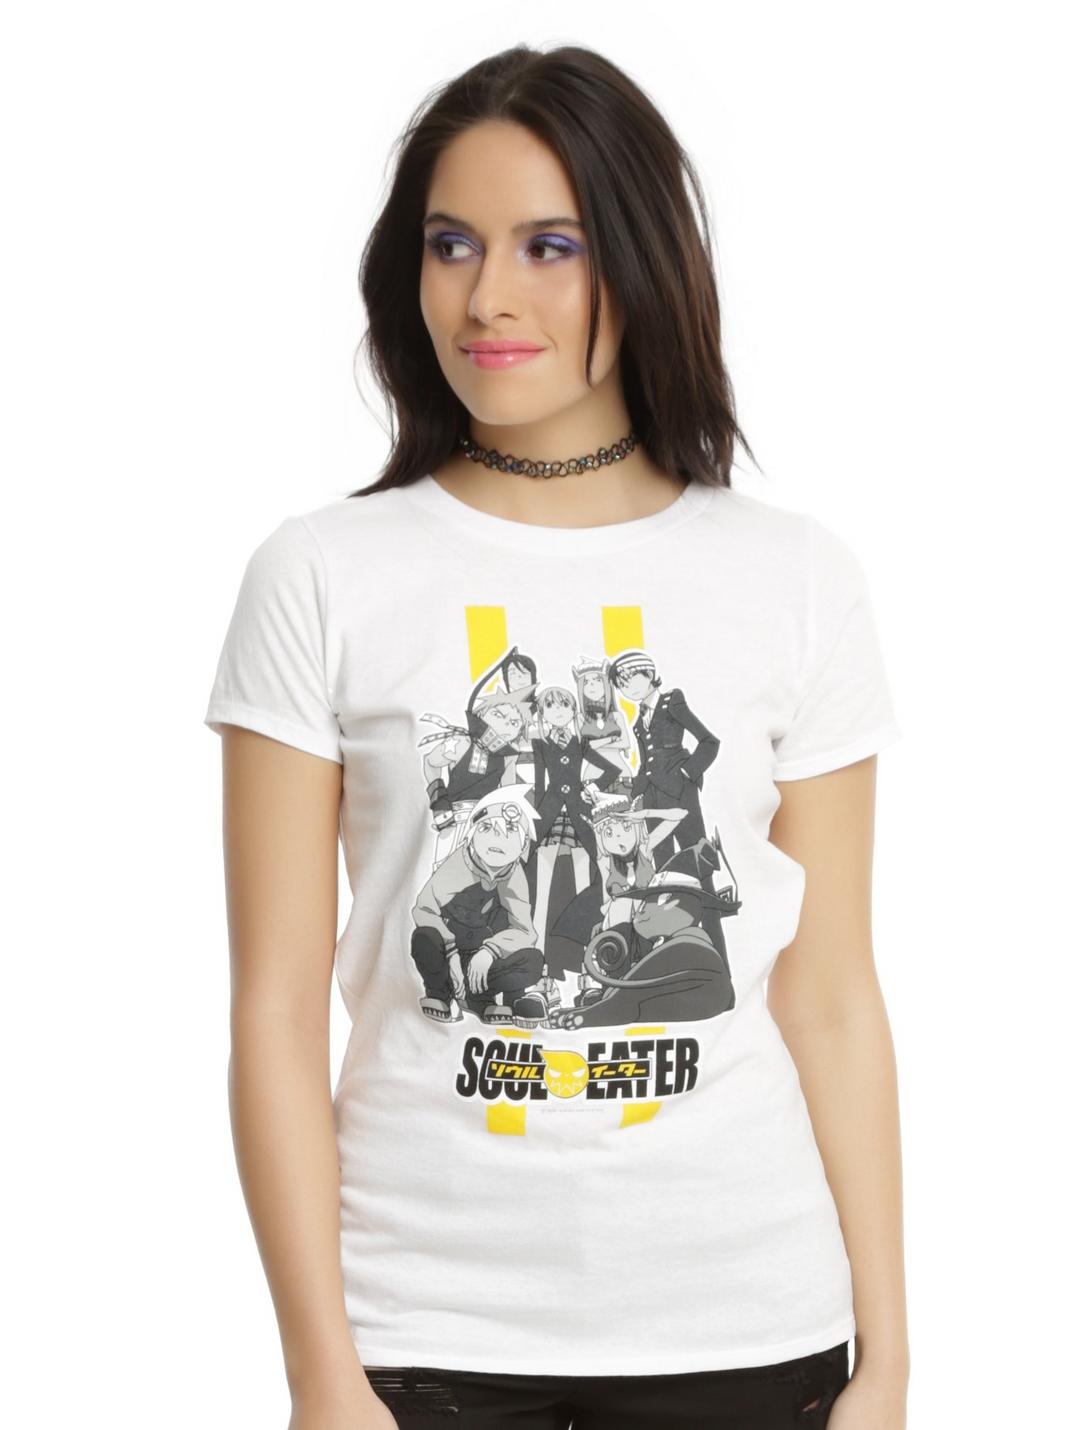 Soul Eater Death Weapon Meister Students Girls T-Shirt, WHITE, hi-res